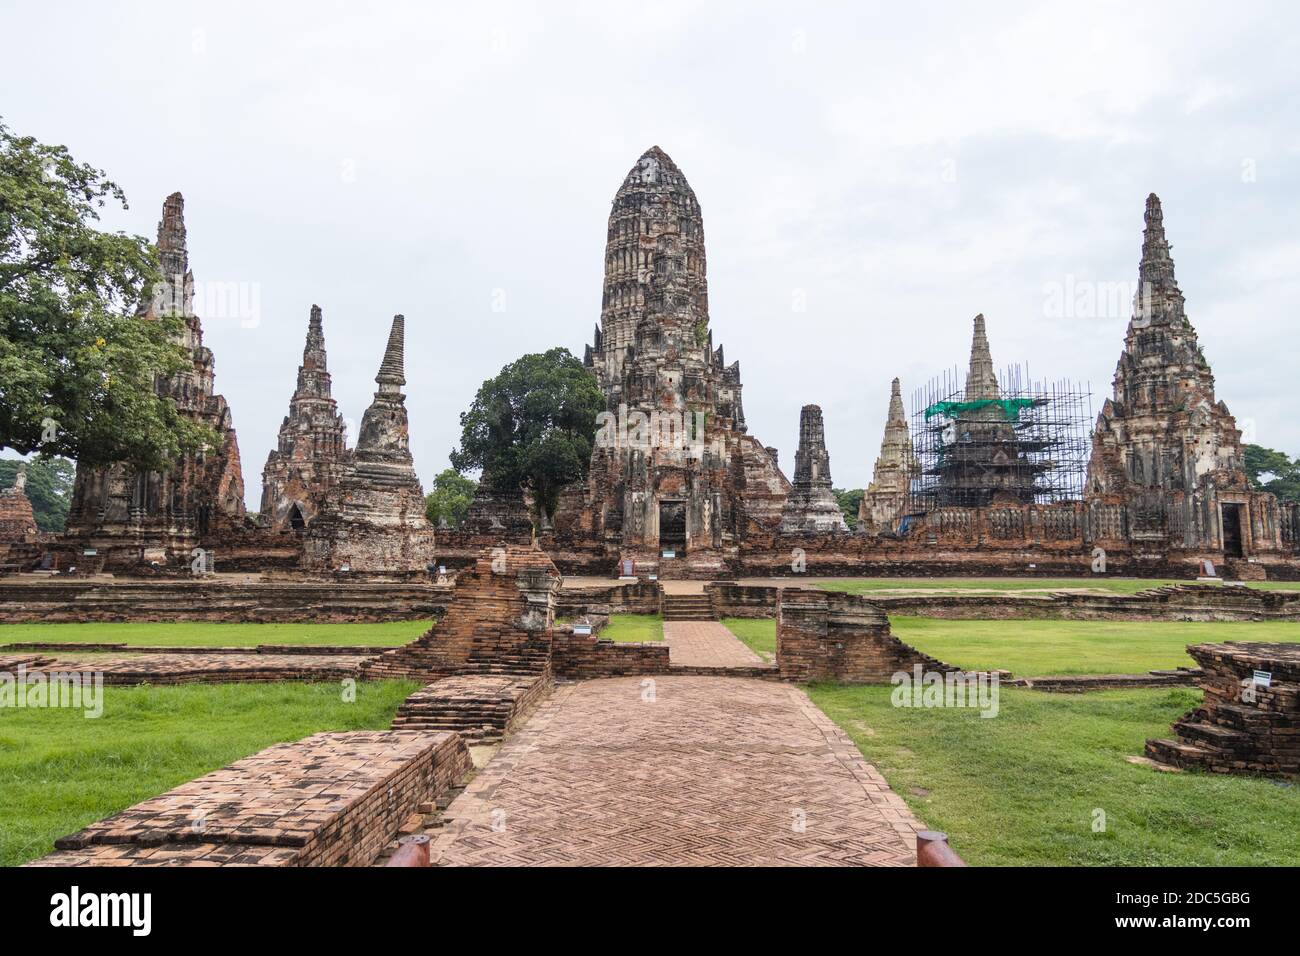 Wat Chaiwatthanaram is a Buddhist temple in the city of Ayutthaya Historical Park, is a landmark of Thailand History and is a tourist attraction Stock Photo